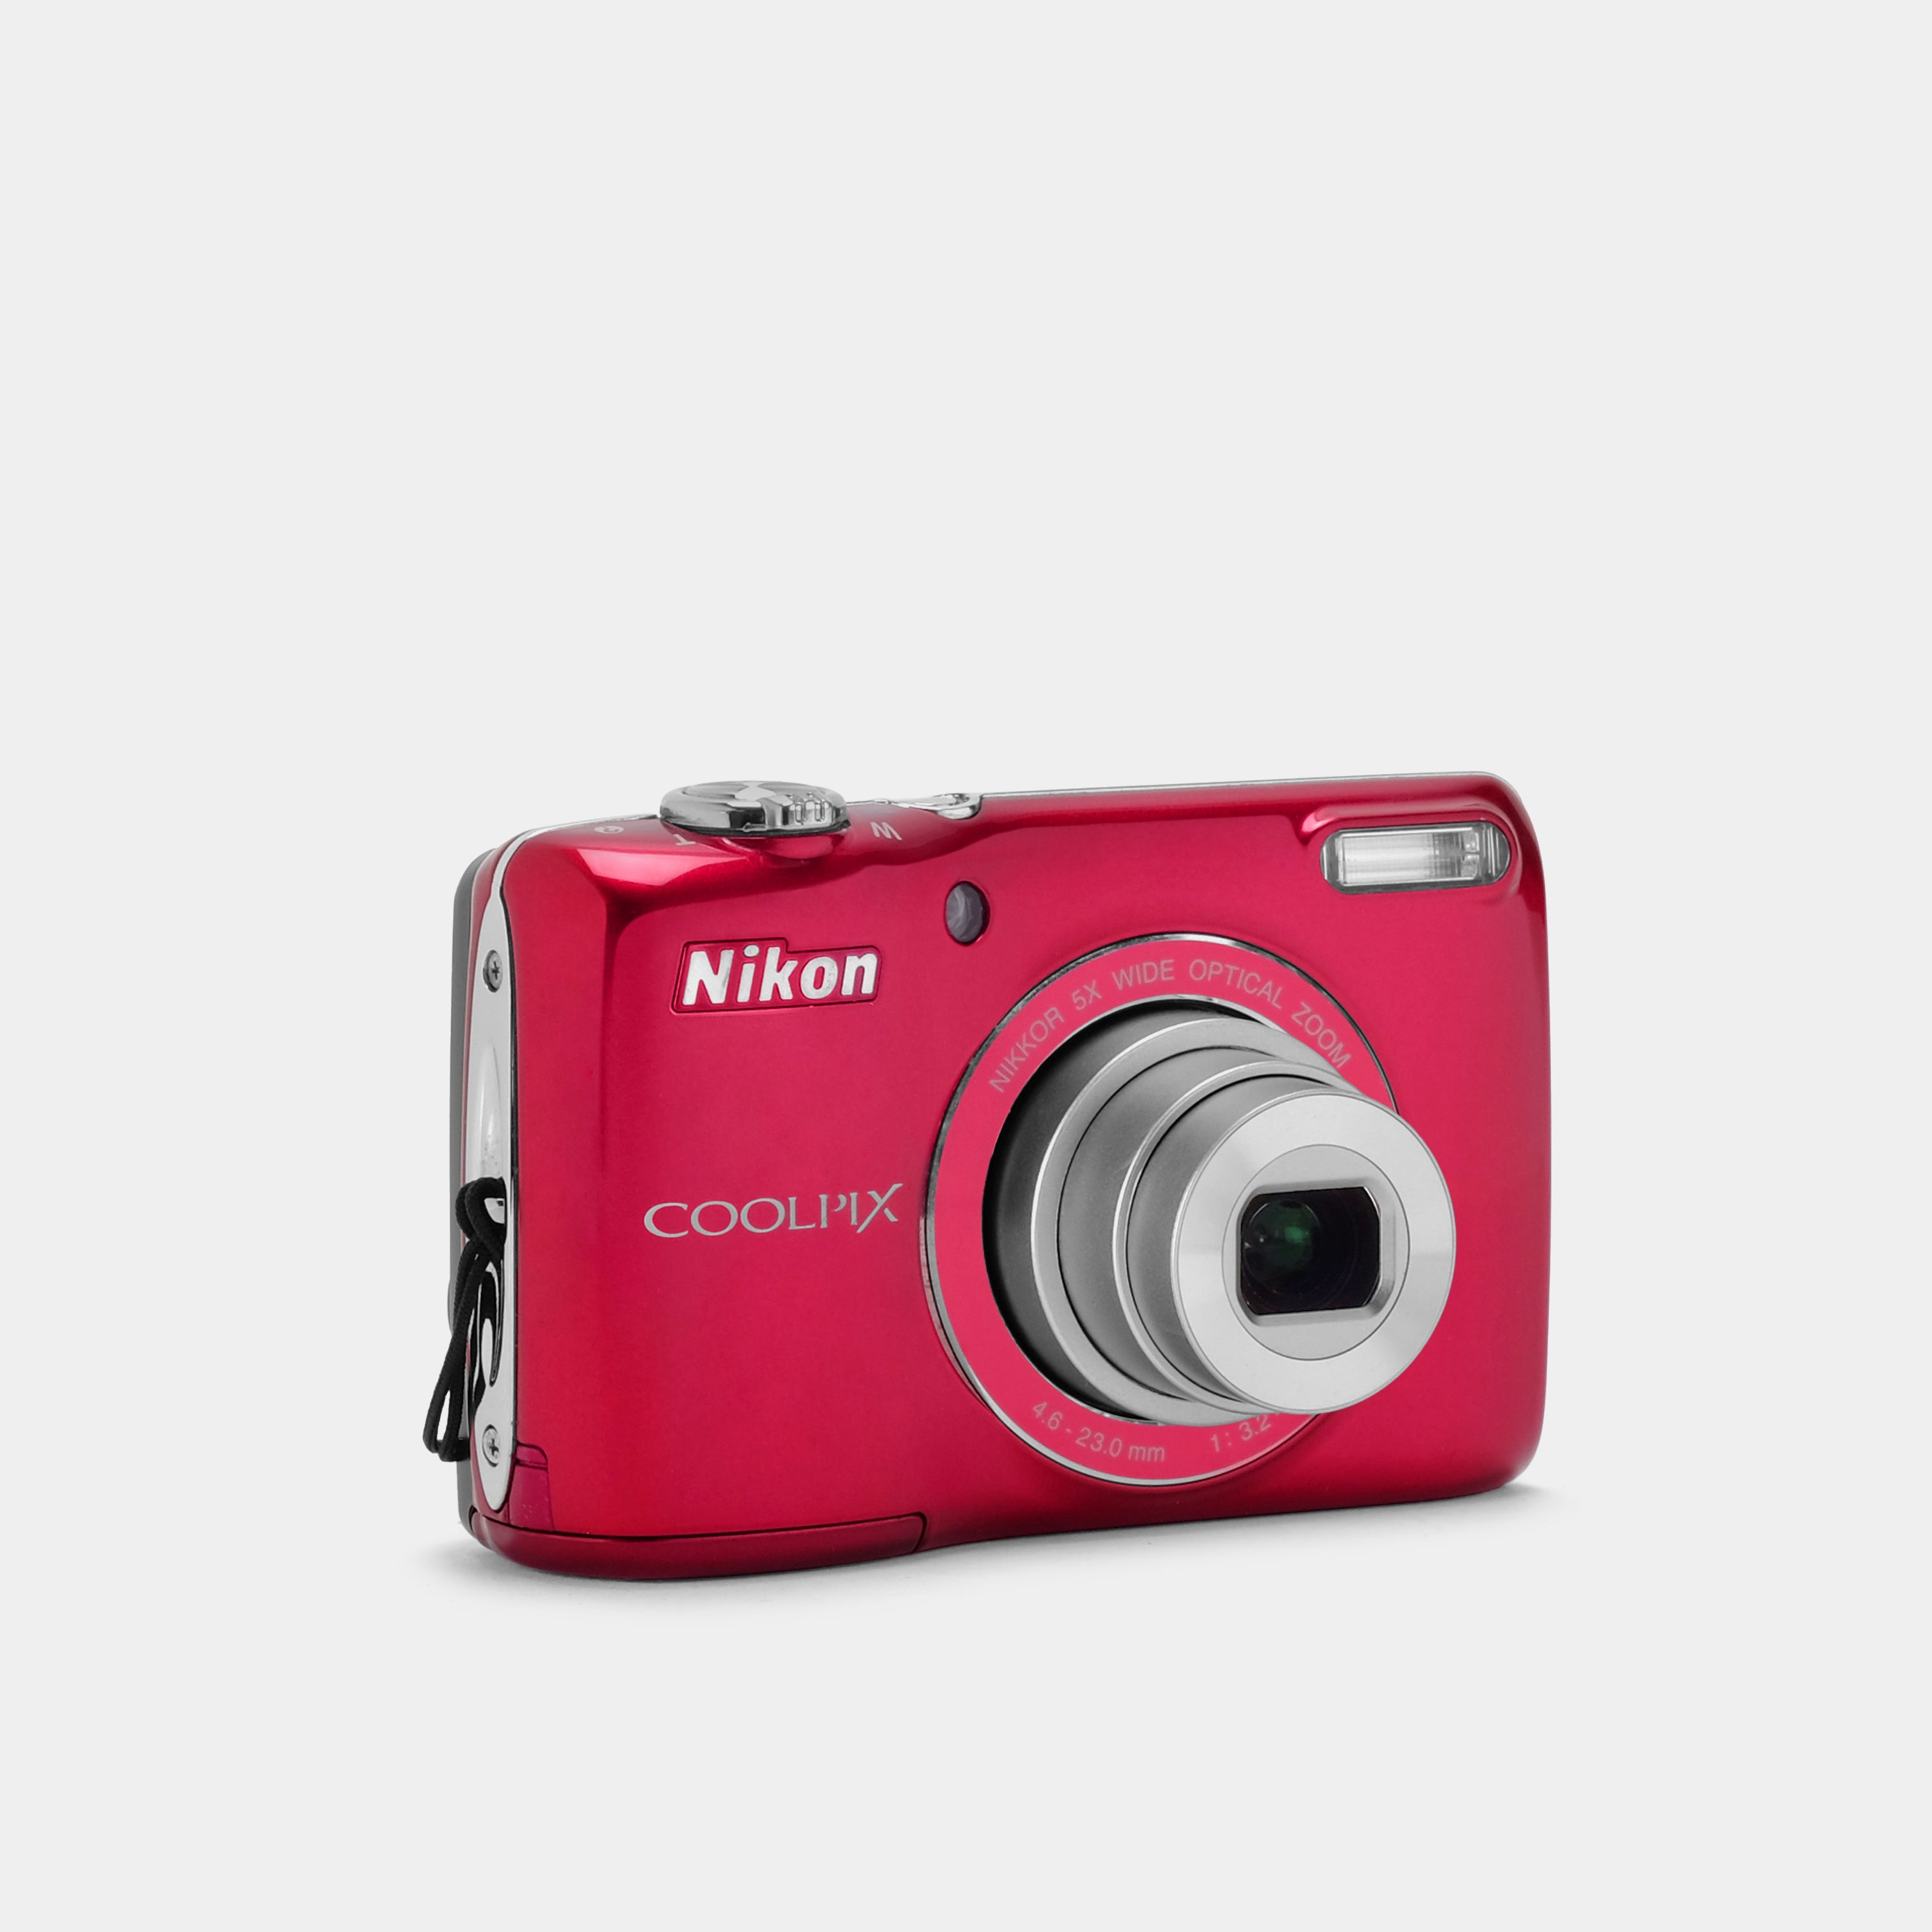 Nikon Coolpix L26 Red Point and Shoot Digital Camera